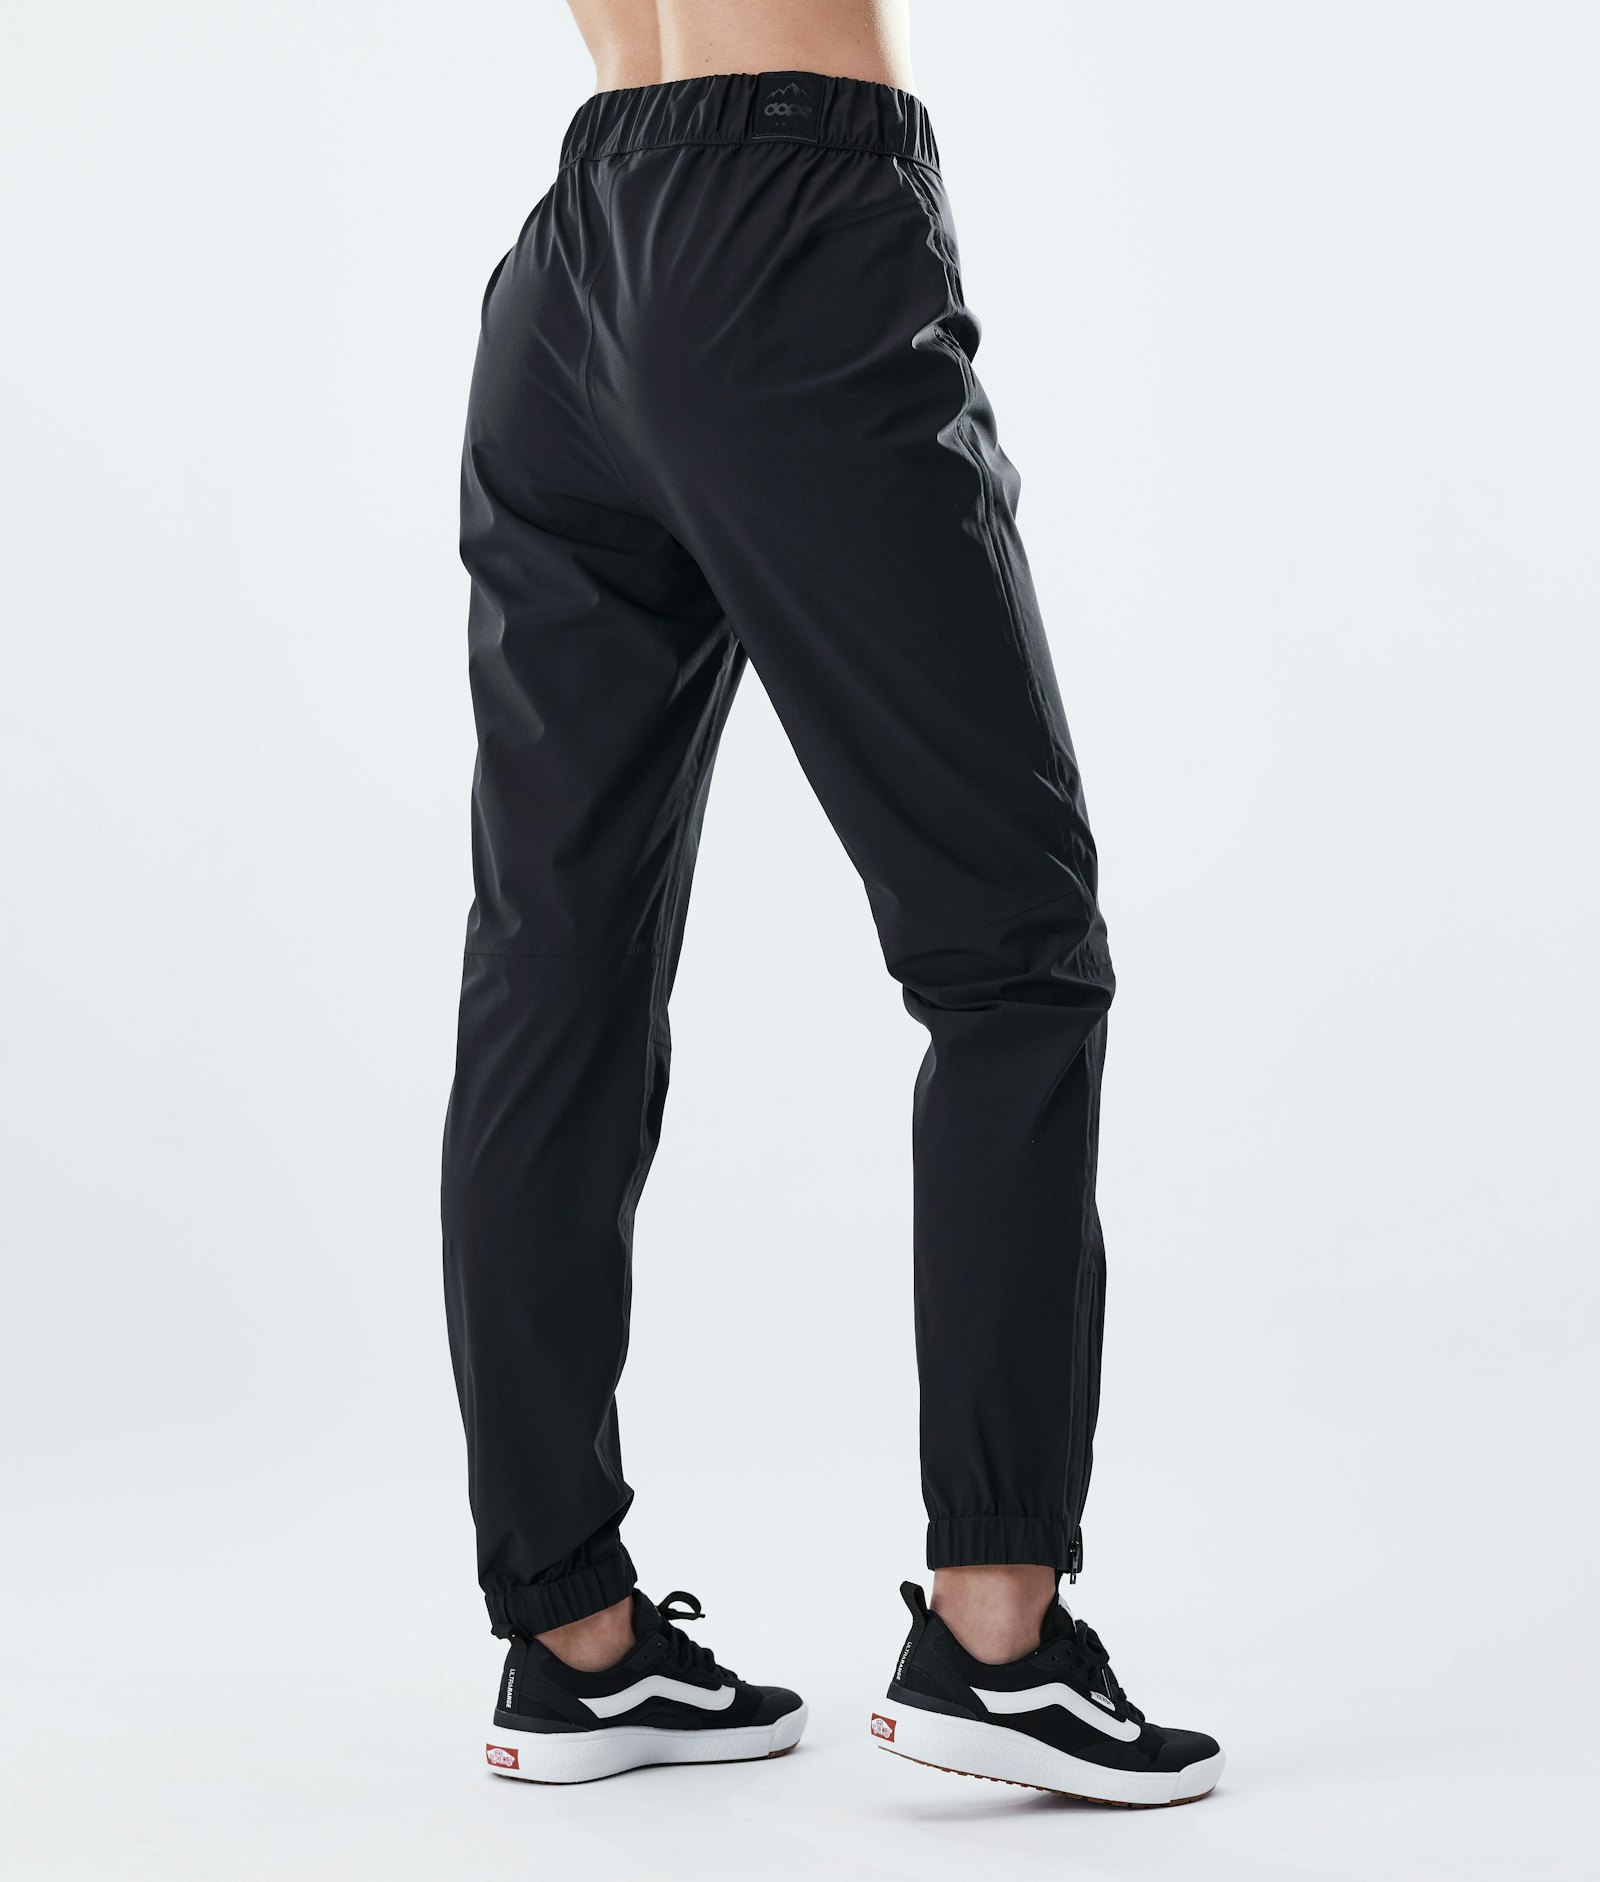 Drizzard W Pantalones Impermeables Mujer Black